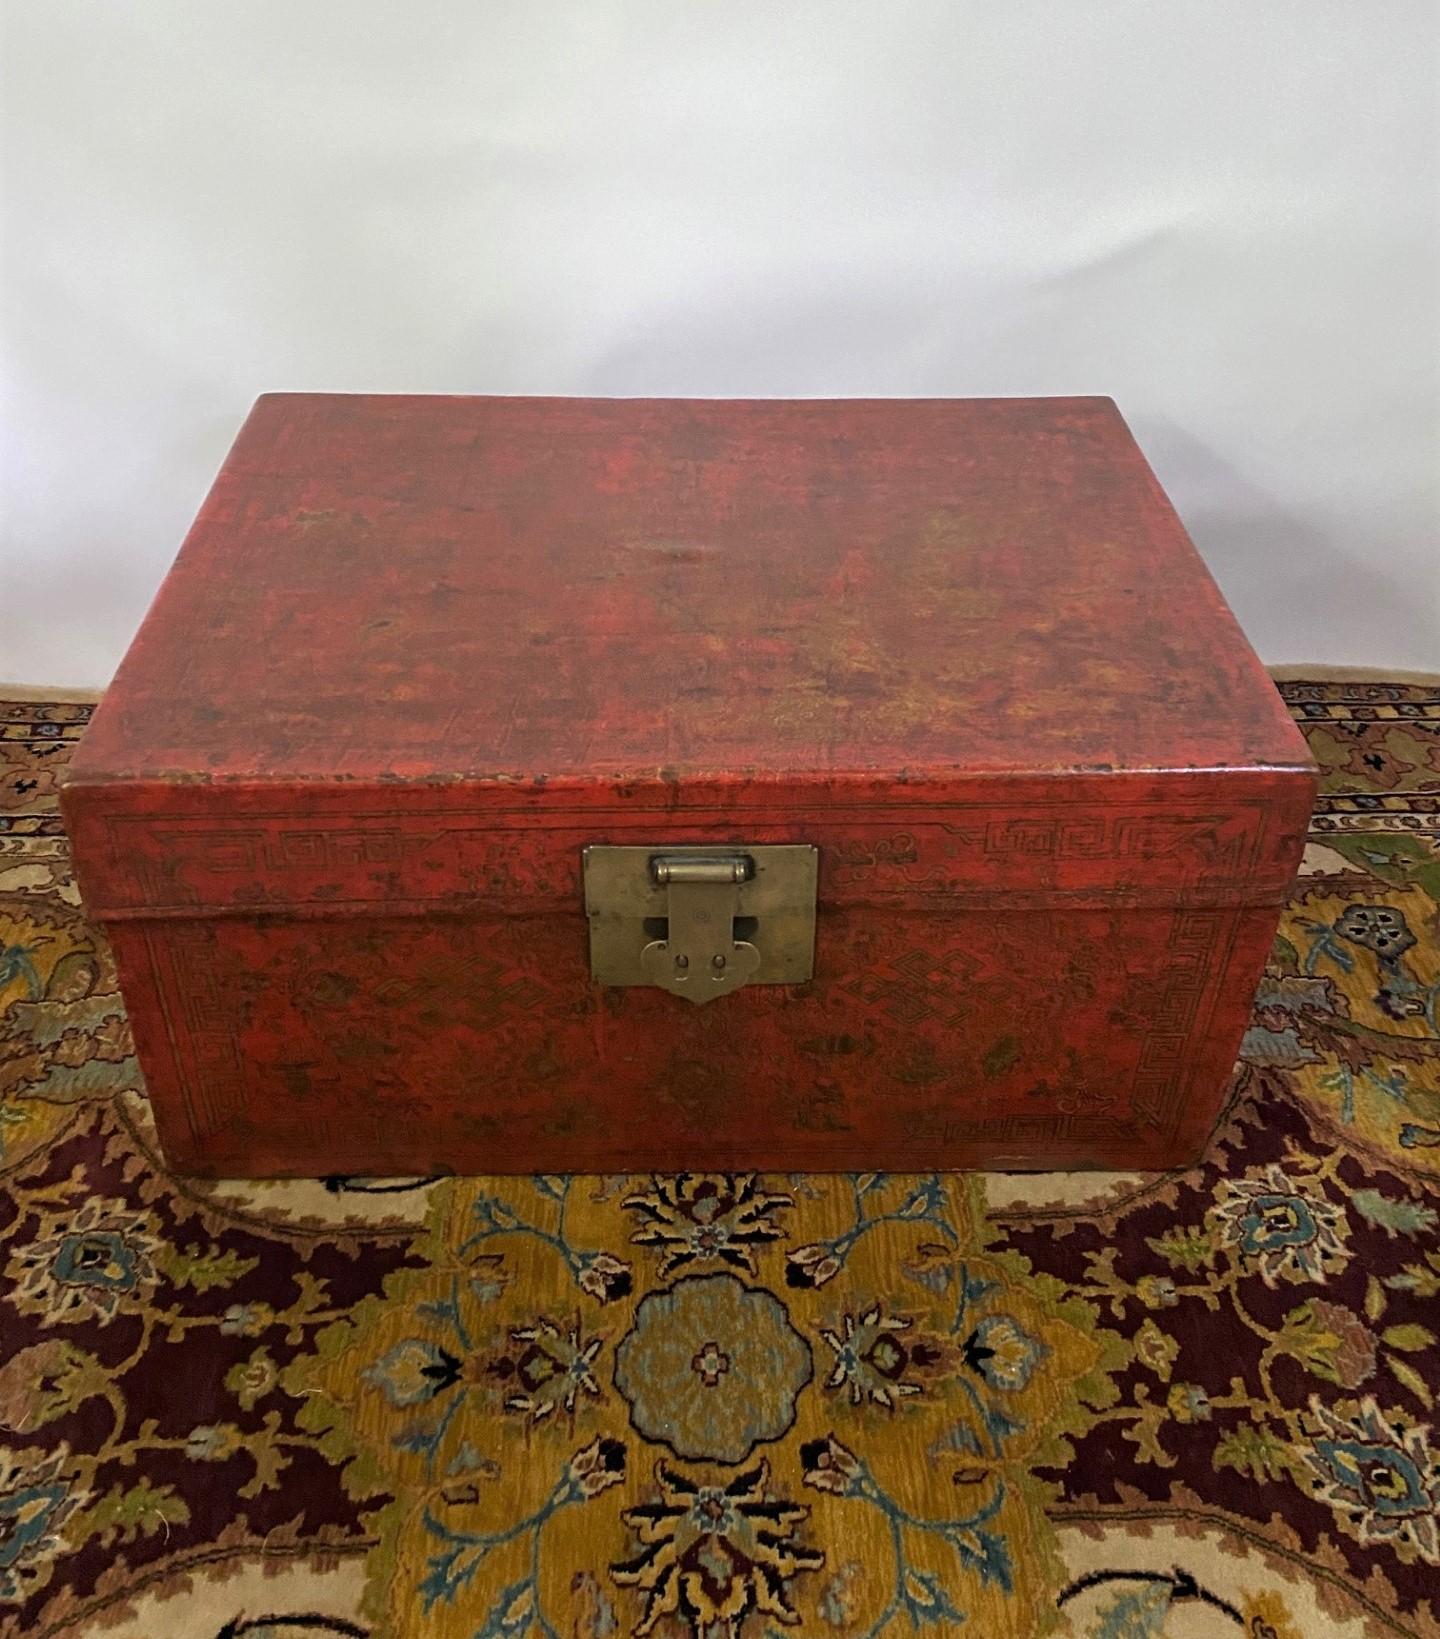 19th century Chinese lacquered leather trunk with hand-painted gold decoration and bronze handles and hardware. This attractive trunk will character to the decor and is great for storage.
